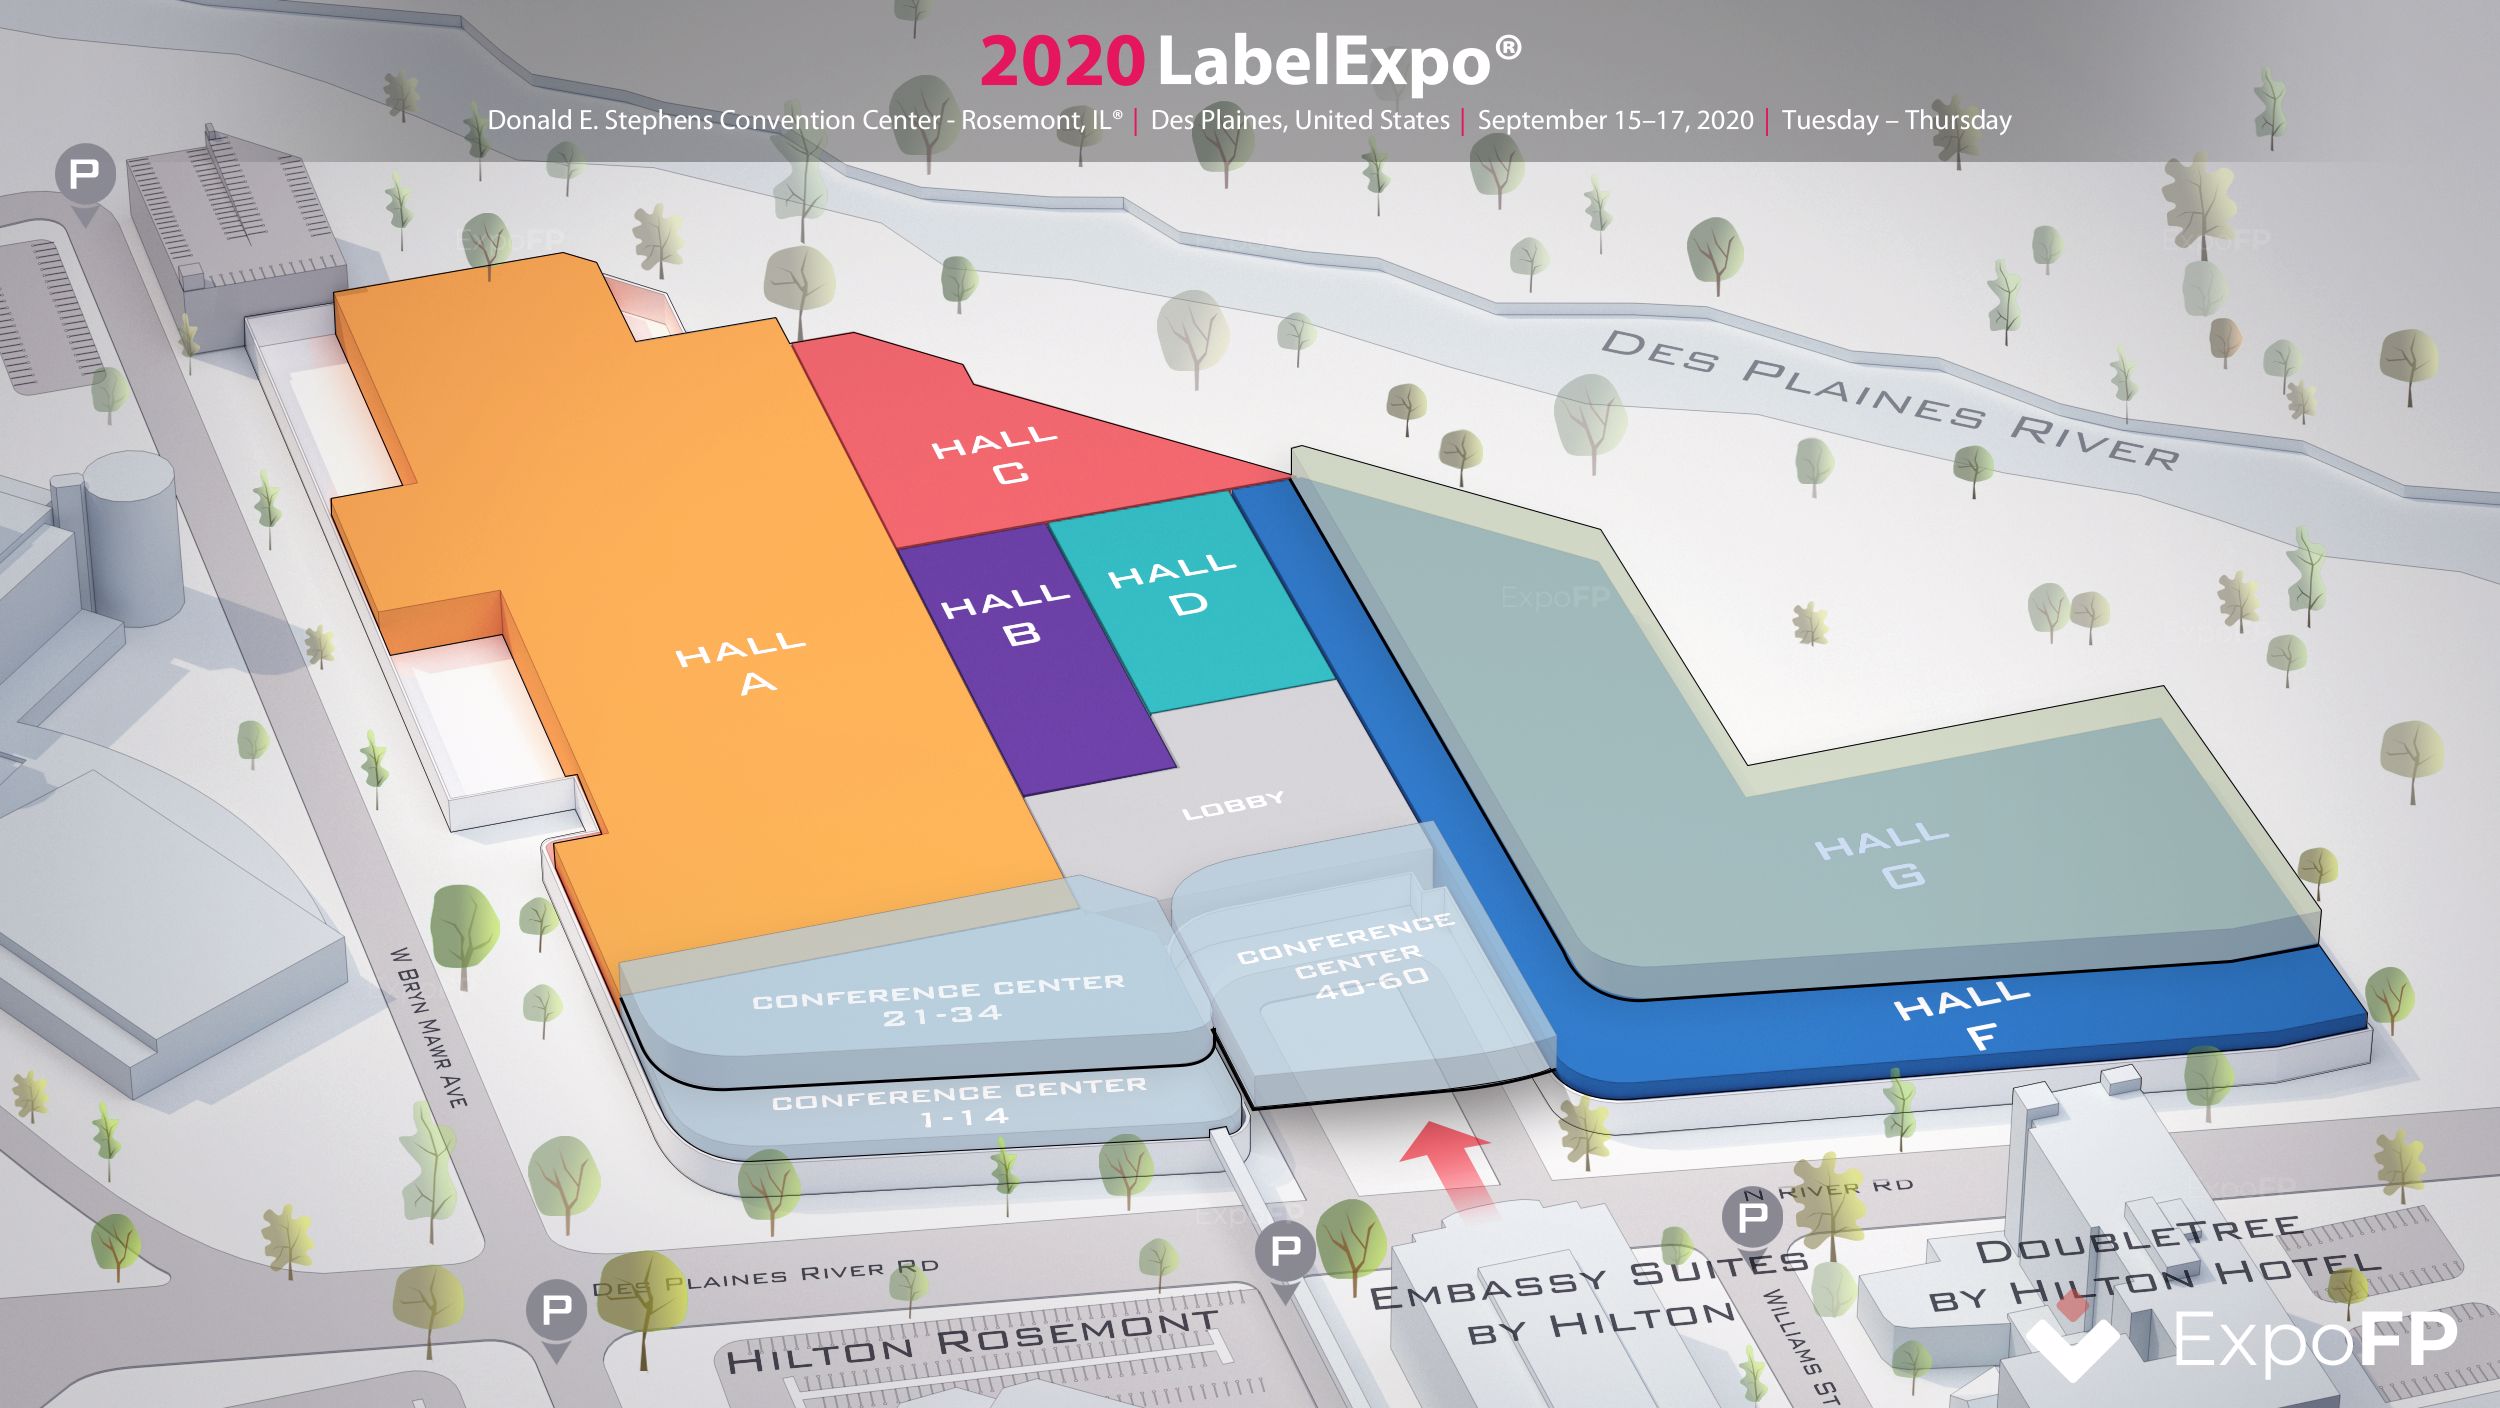 LabelExpo 2020 in Donald E. Stephens Convention Center